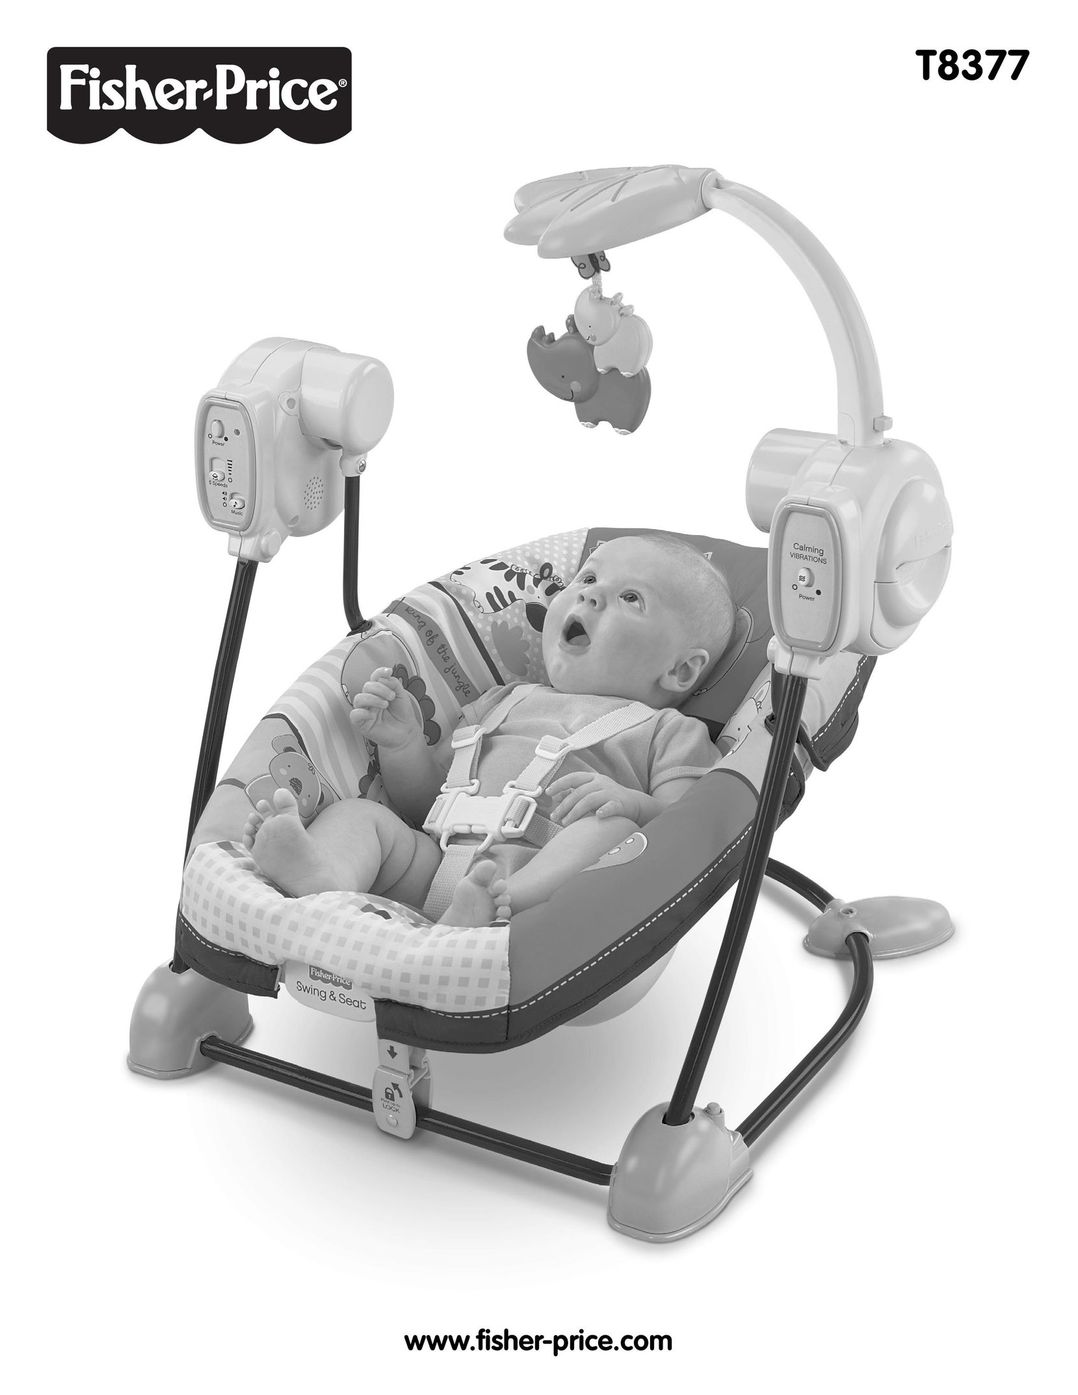 Fisher-Price T8377 Baby Accessories User Manual